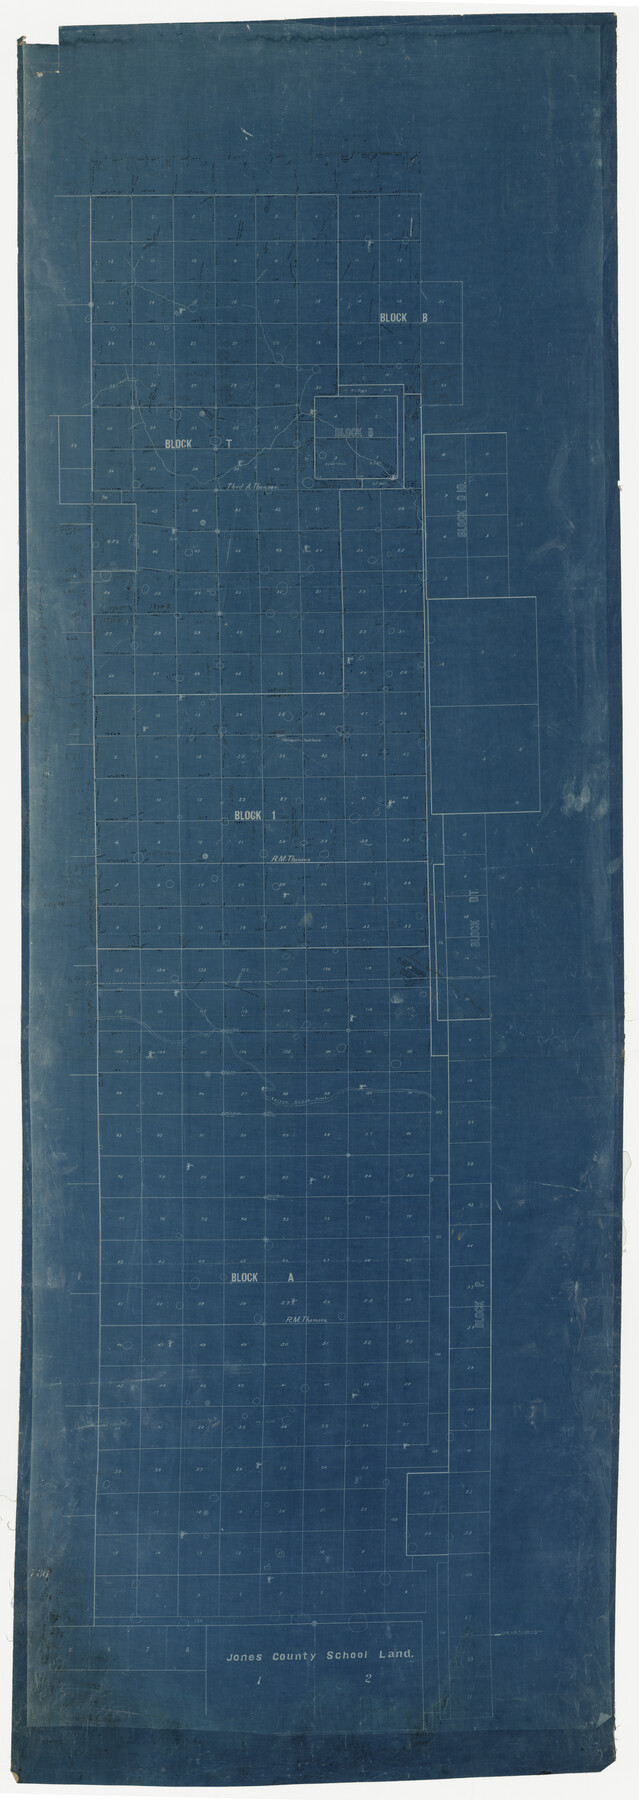 9173, Hockley County Rolled Sketch 3, General Map Collection